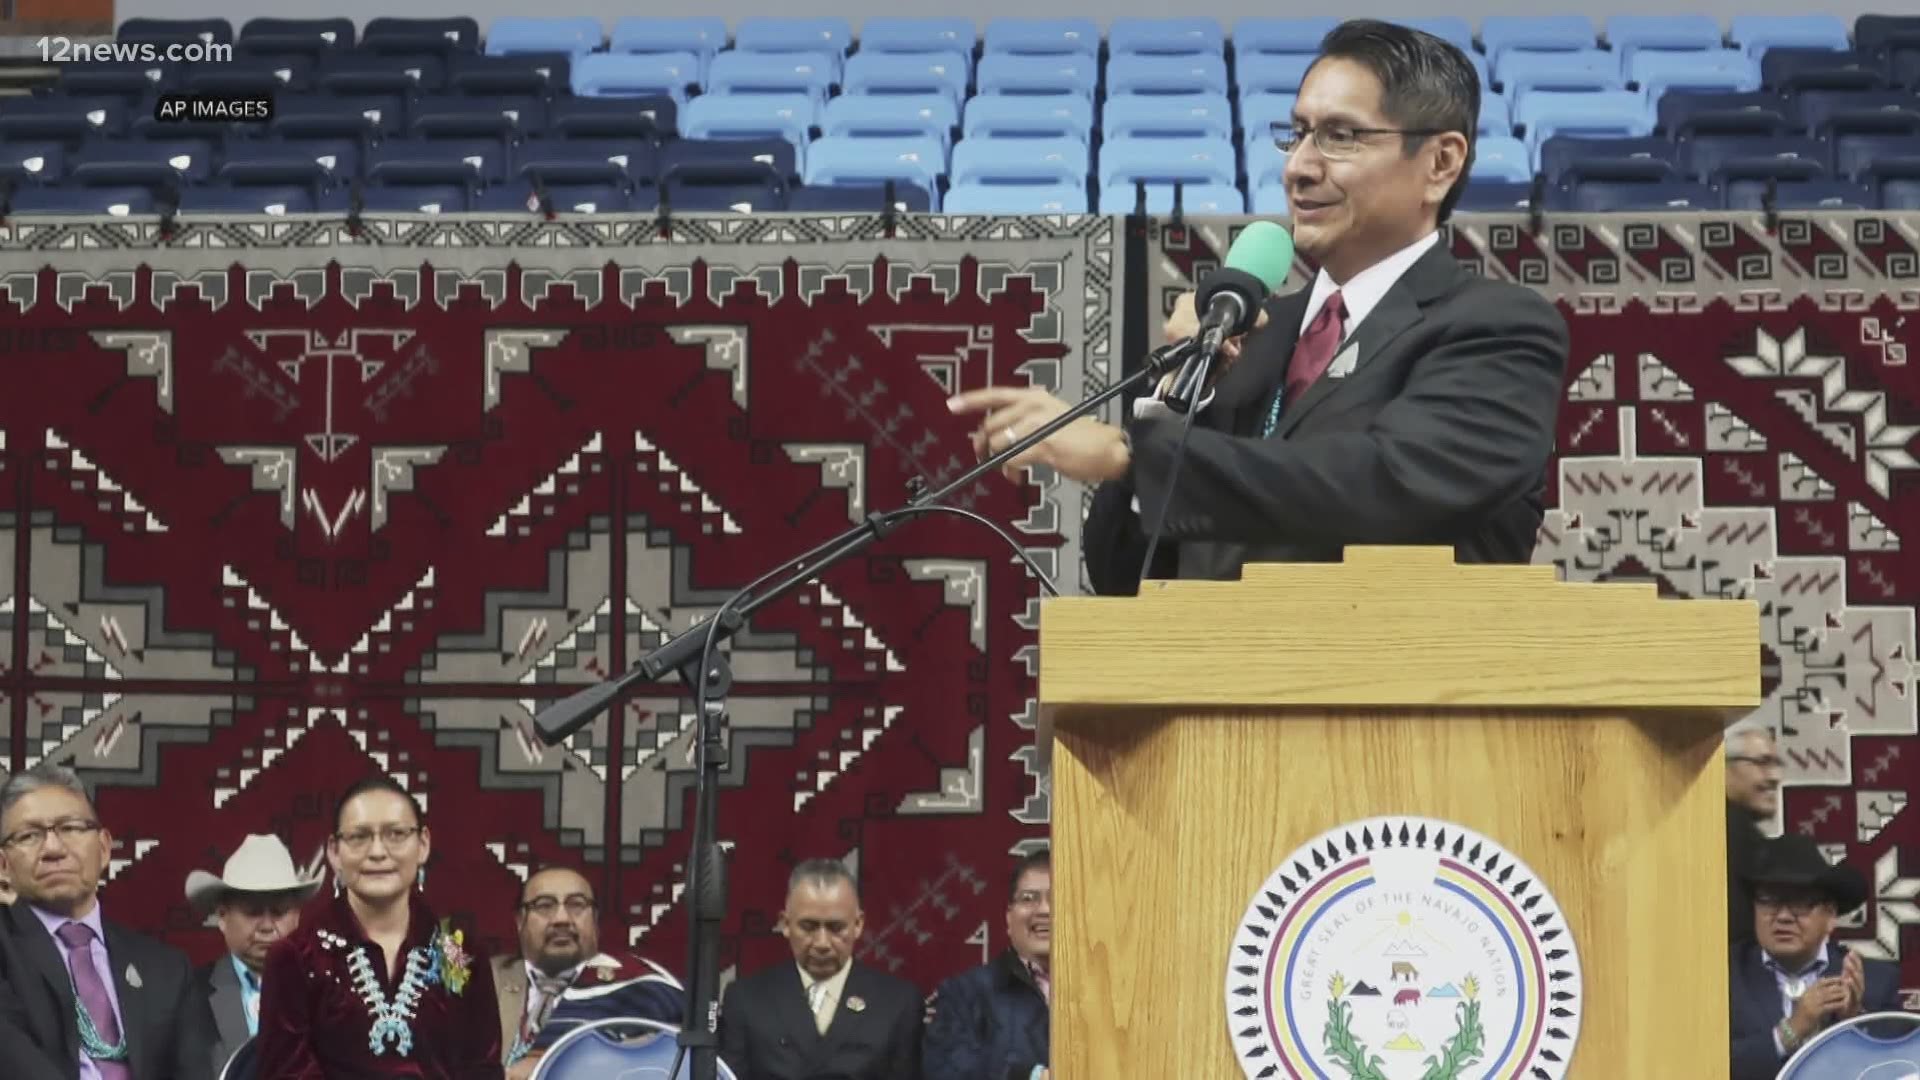 Navajo Nation President Johnathan Nez is praising the NFL and the Washington franchise for dropping the Redskin name. He says it'll be good for future generations.